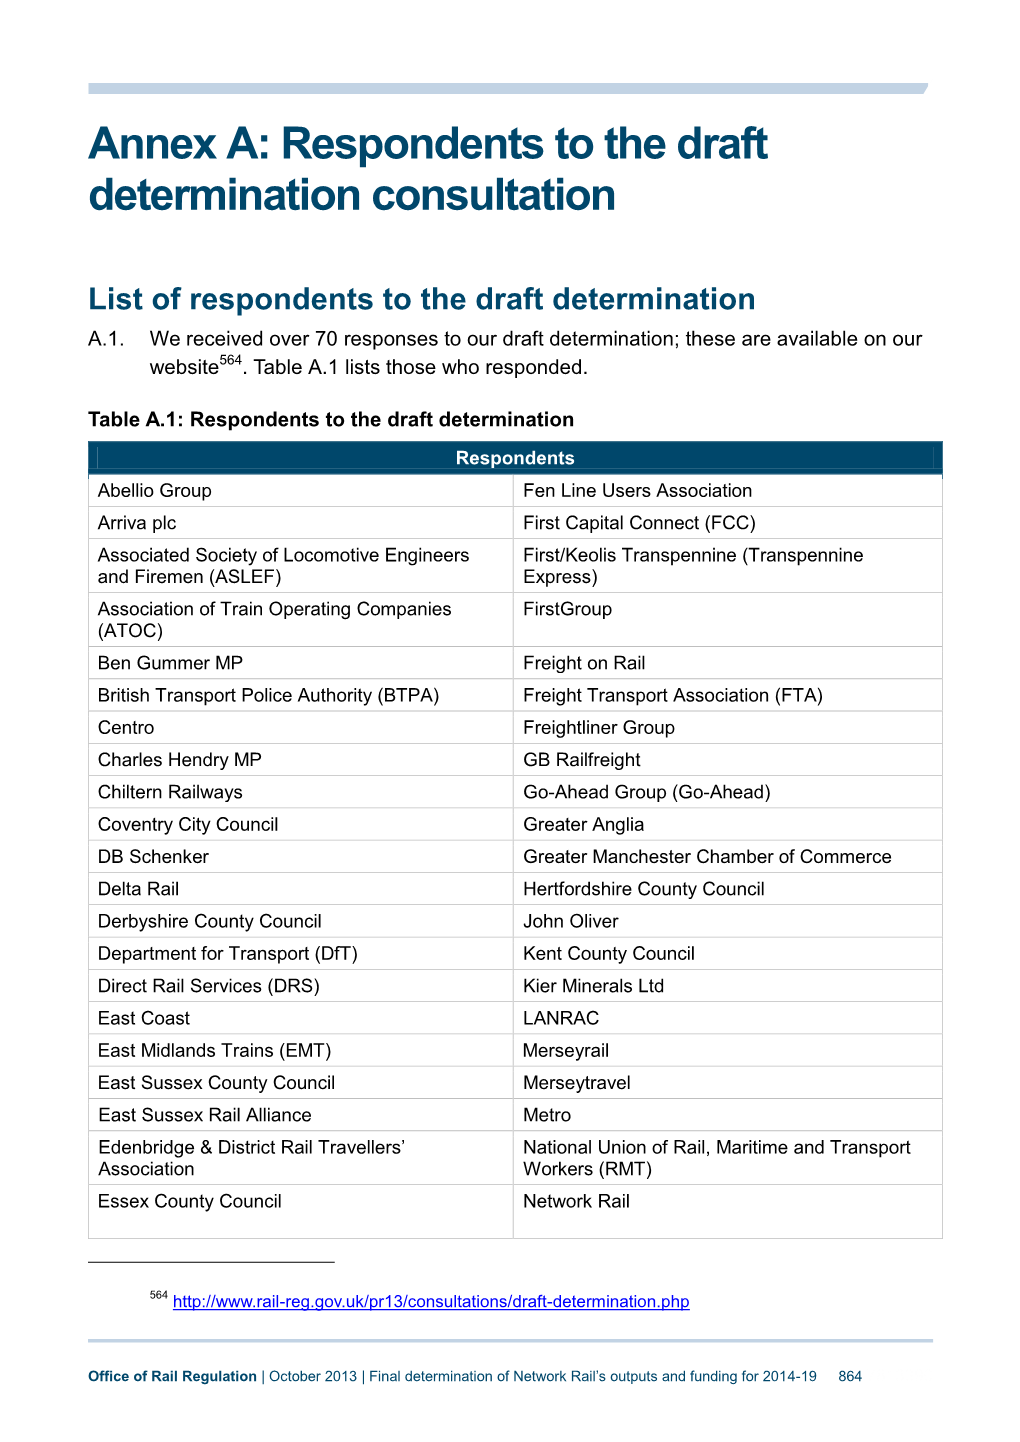 Annex A: Respondents to the Draft Determination Consultation